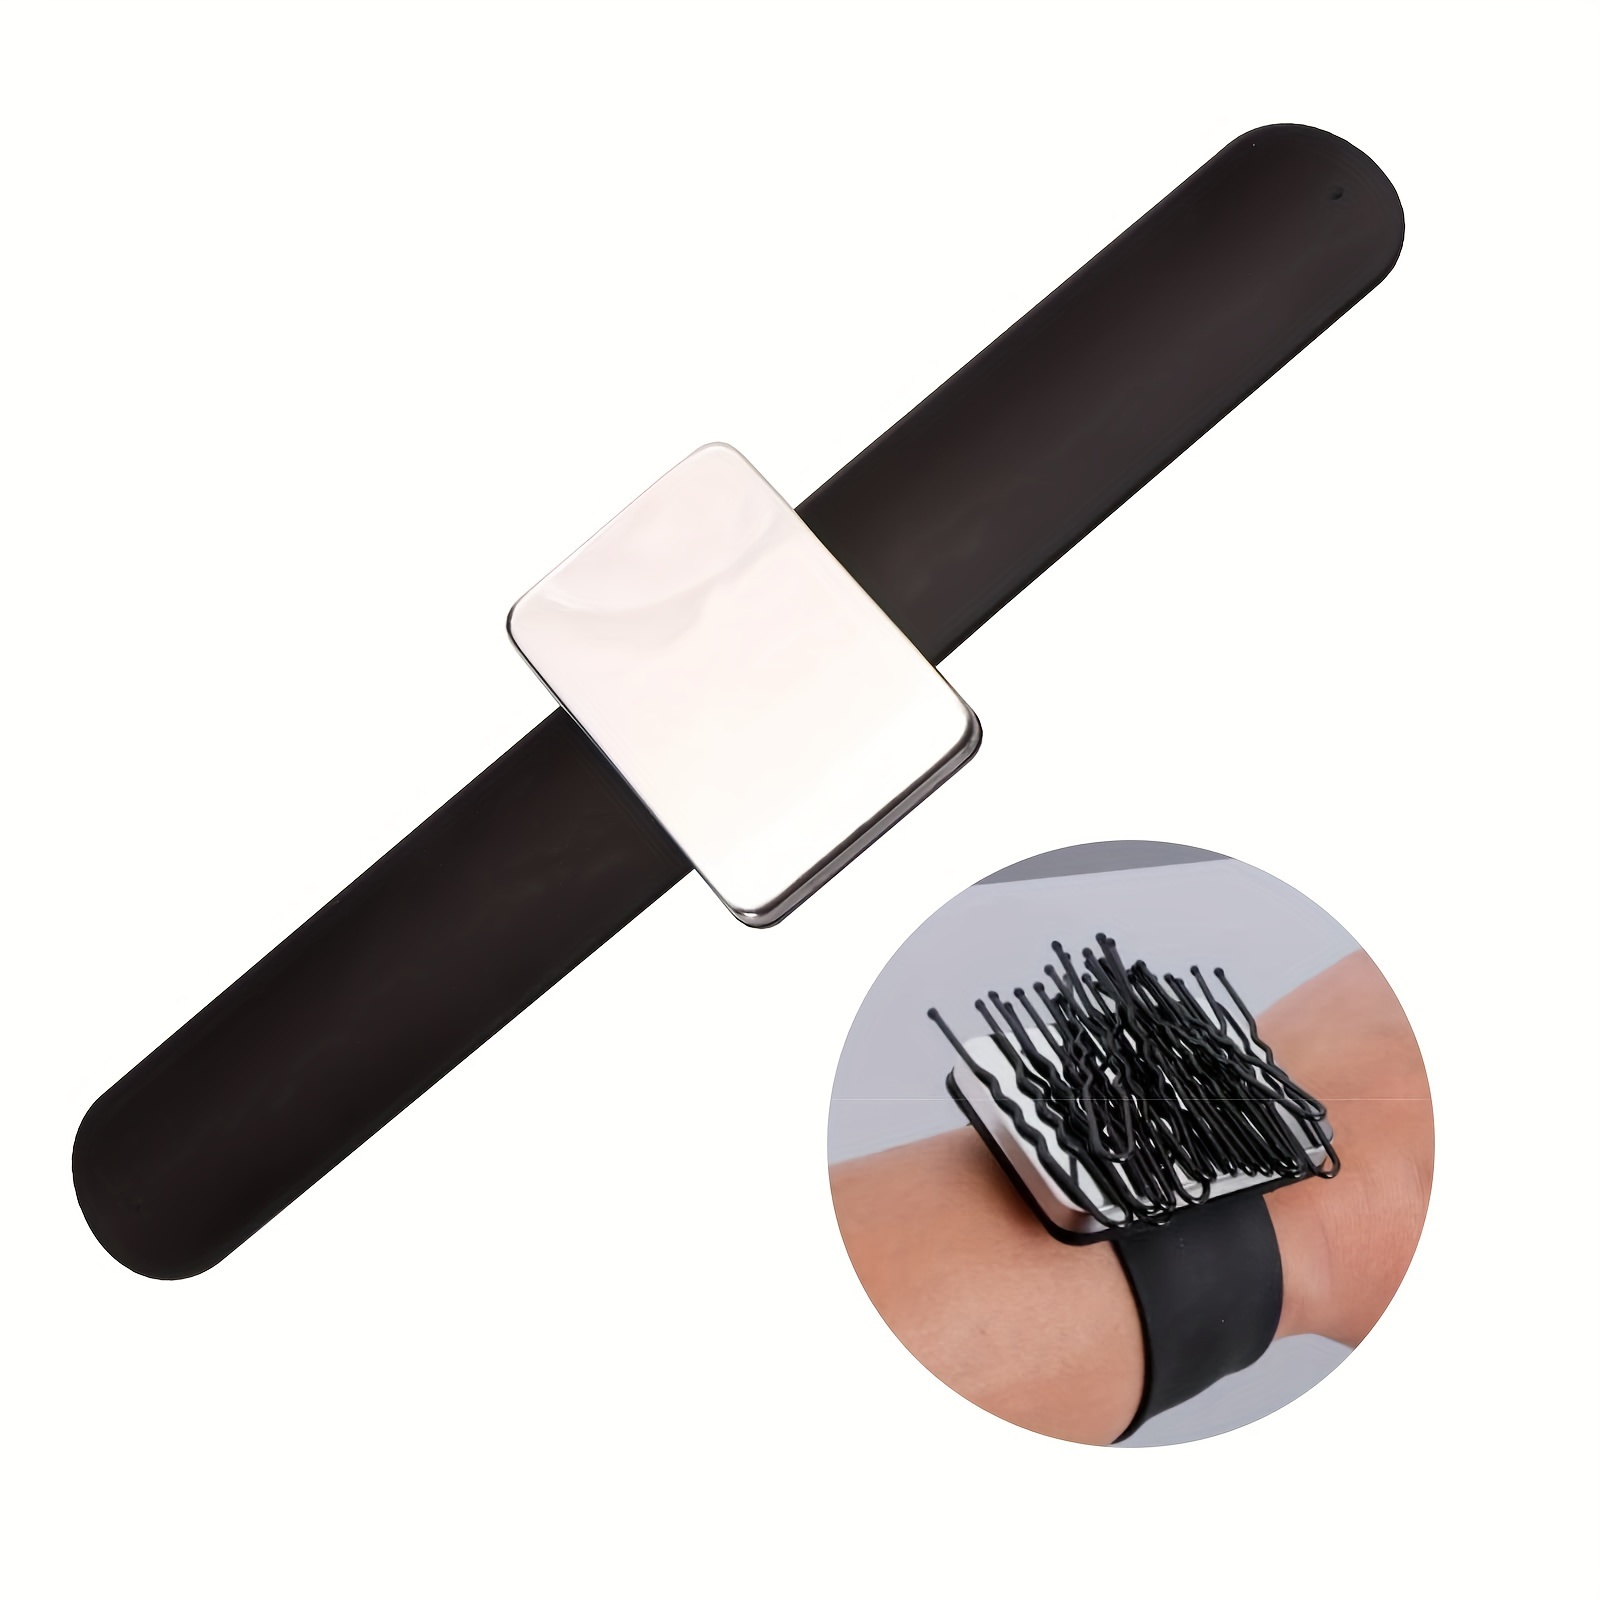  Magnetic Pin Holder Wrist Band, MORGLES Magnetic Wrist Sewing  Pincushion Wristband for Gel Pin Holder for Stylist Hair Pins Holder with  Combs for Braiding Hair Tool Supplies, Pink : Arts, Crafts